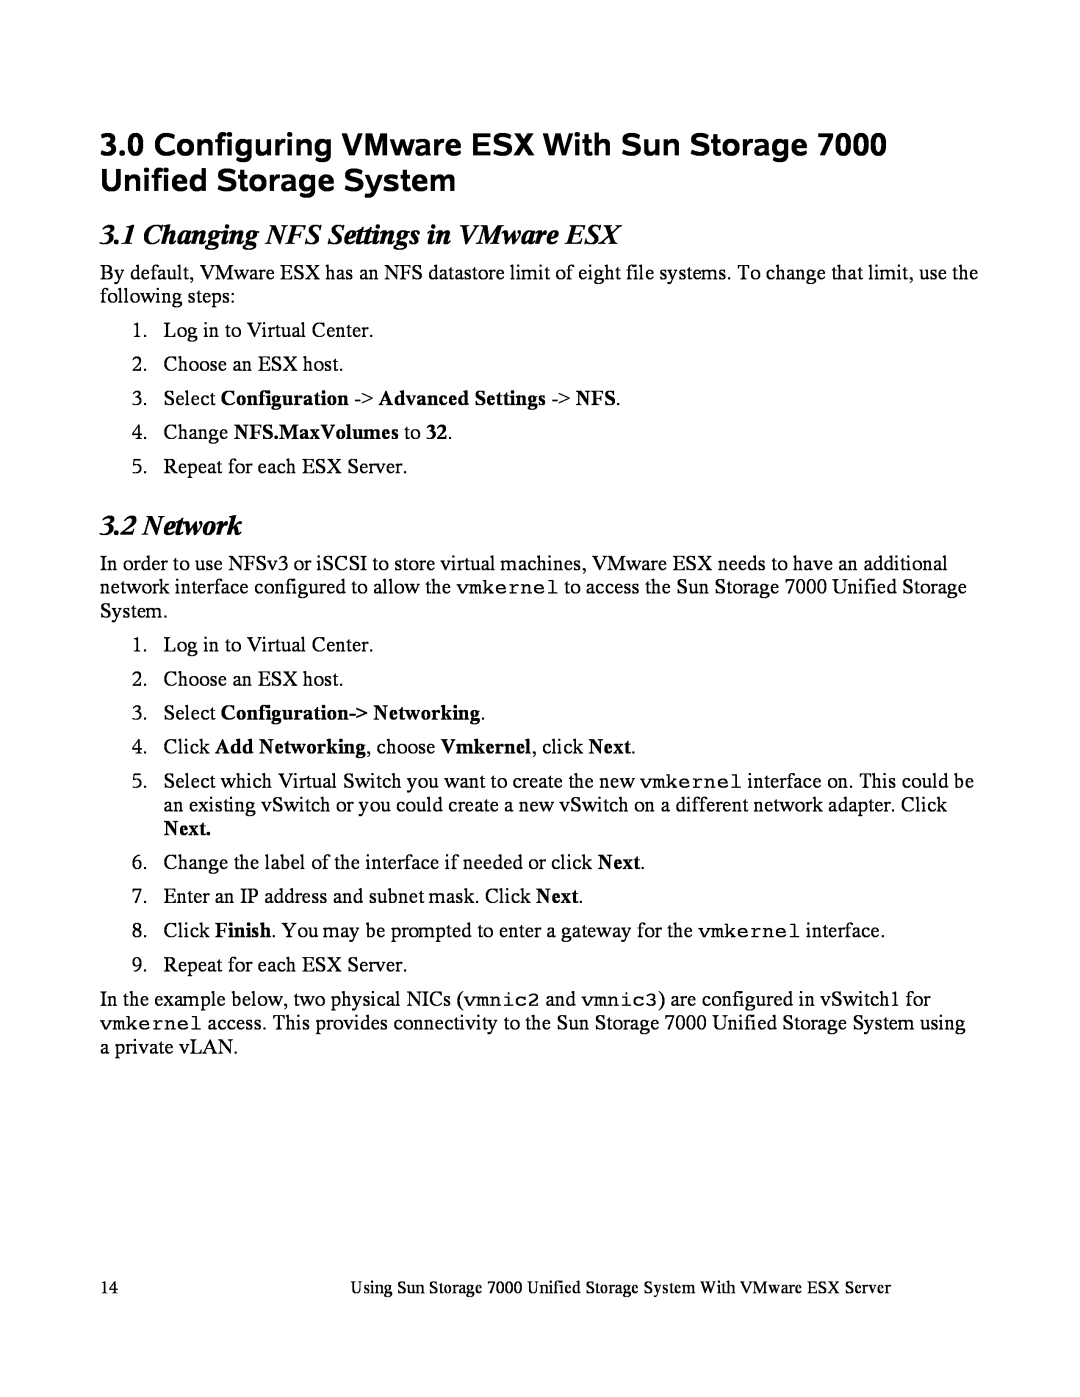 Sun Microsystems 7000 Changing NFS Settings in VMware ESX, Network, Select Configuration - Advanced Settings - NFS, Next 